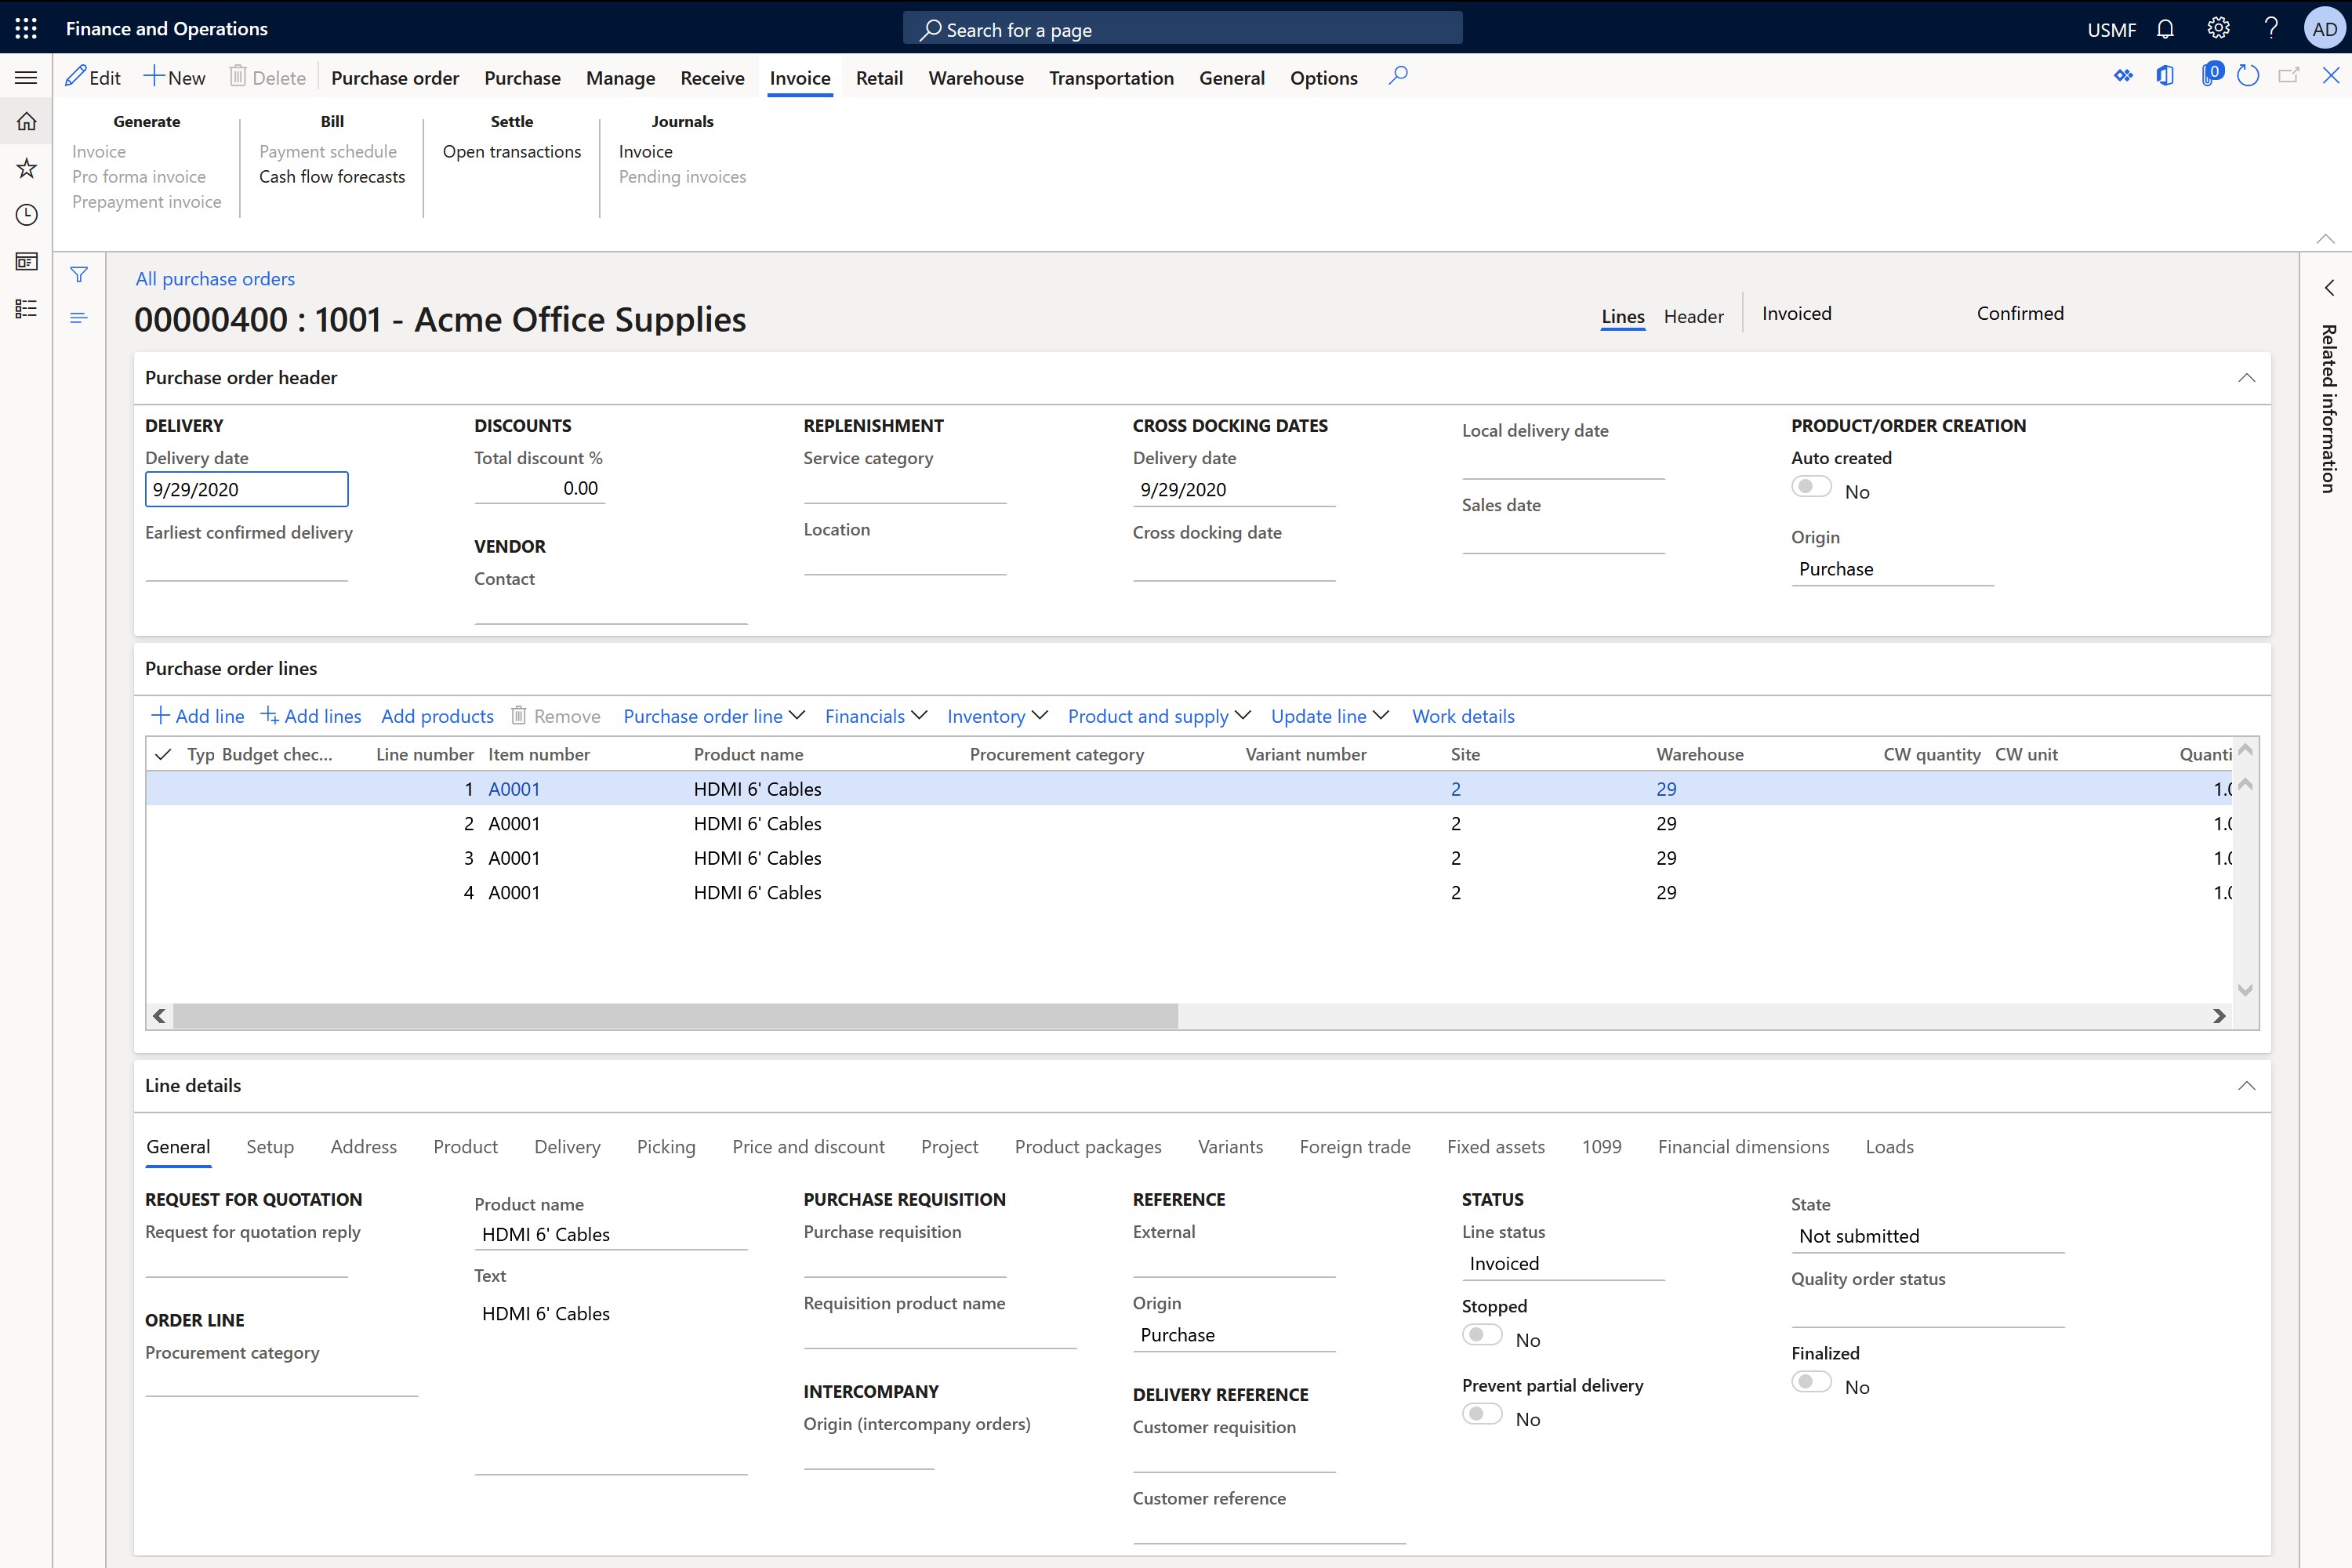 Screenshot of purchase order form in supply chain management.